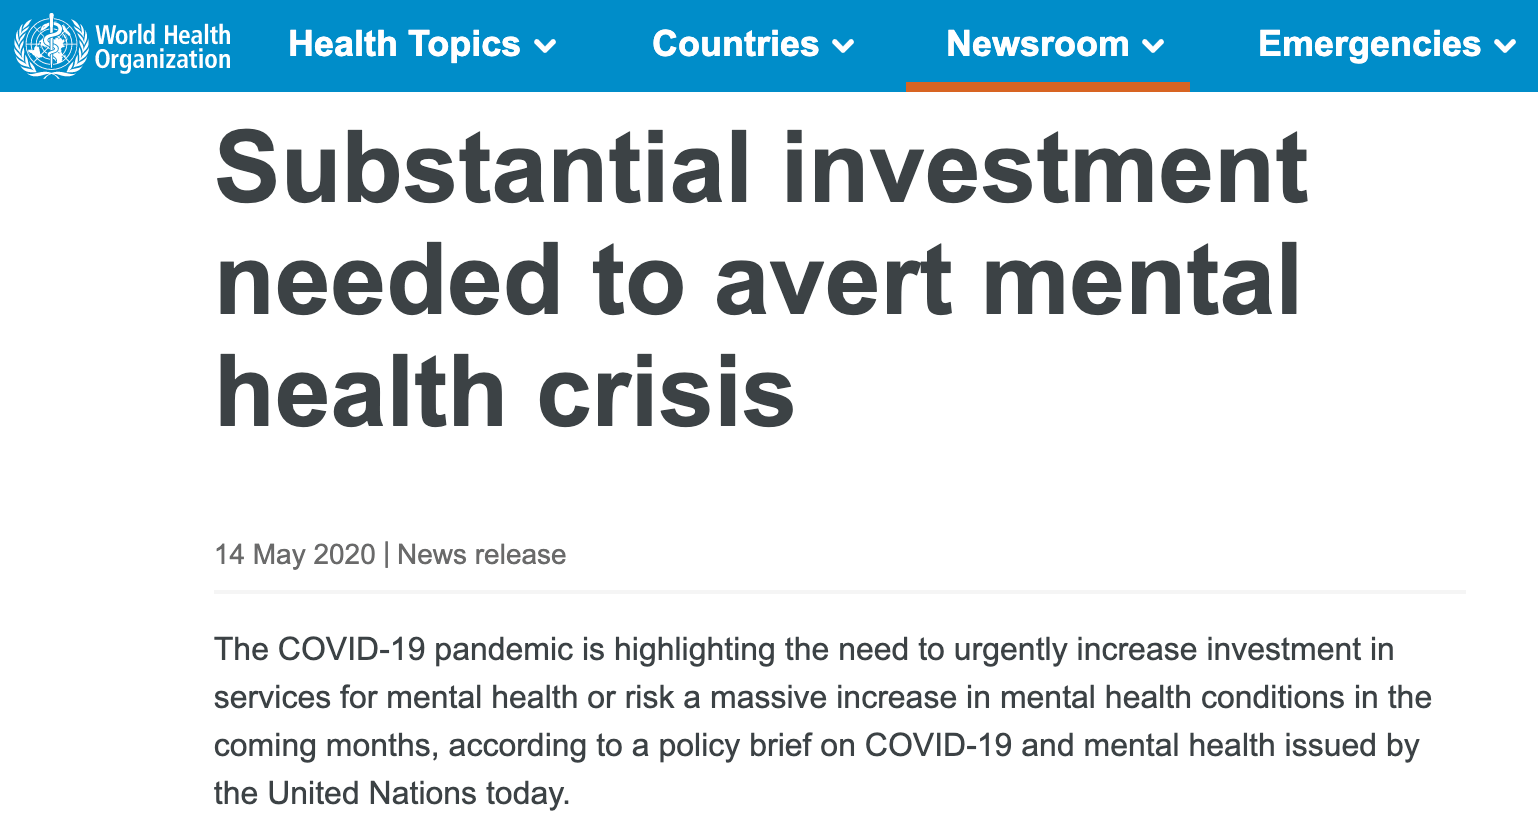 News release by the WHO - Social investment needed to avert mental health crisis